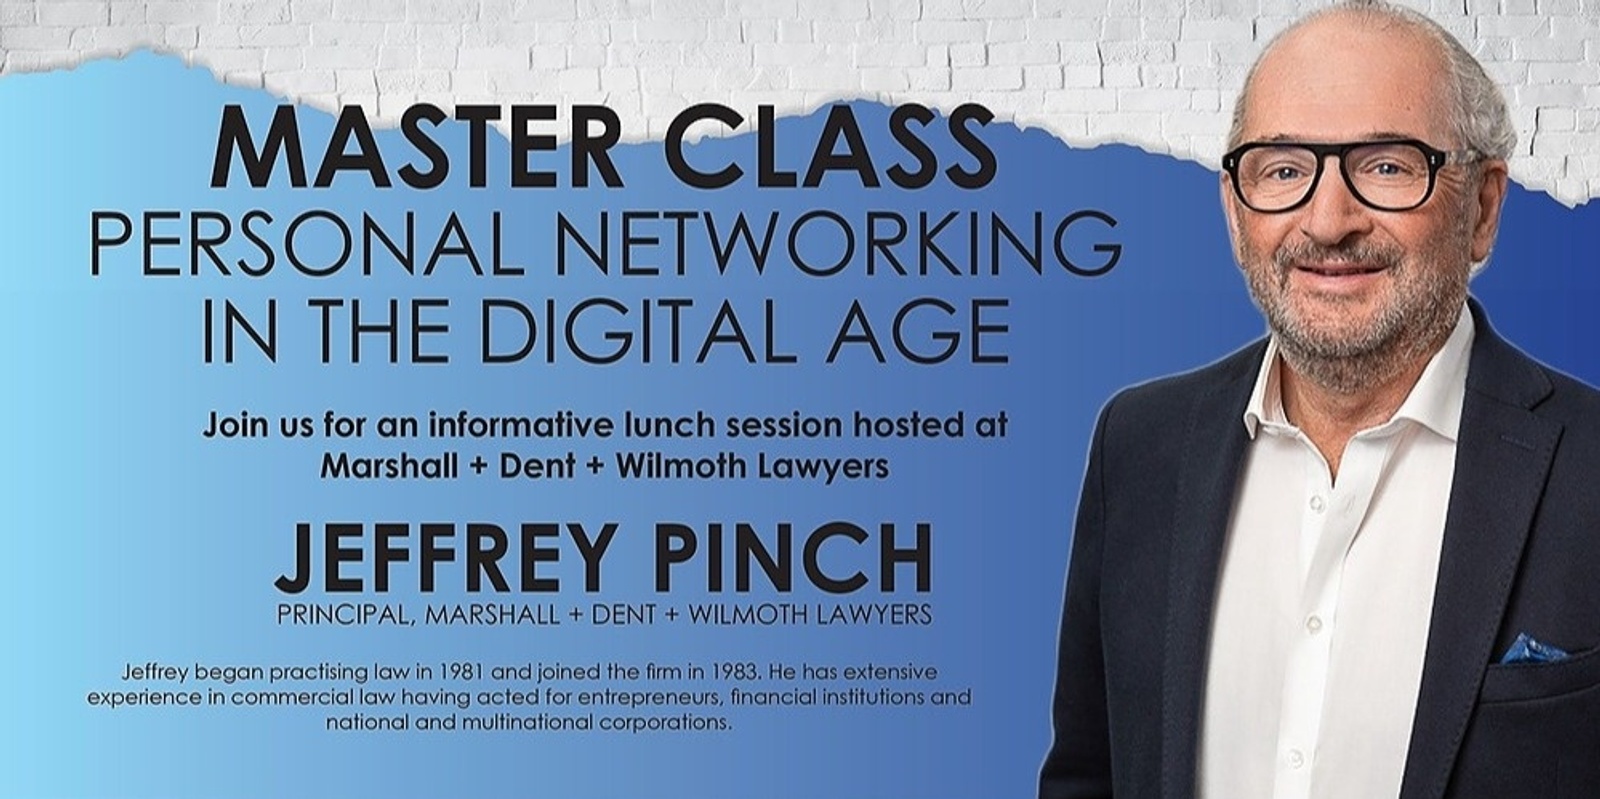 Jeffrey Pinch - Personal Networking in the Digital Age